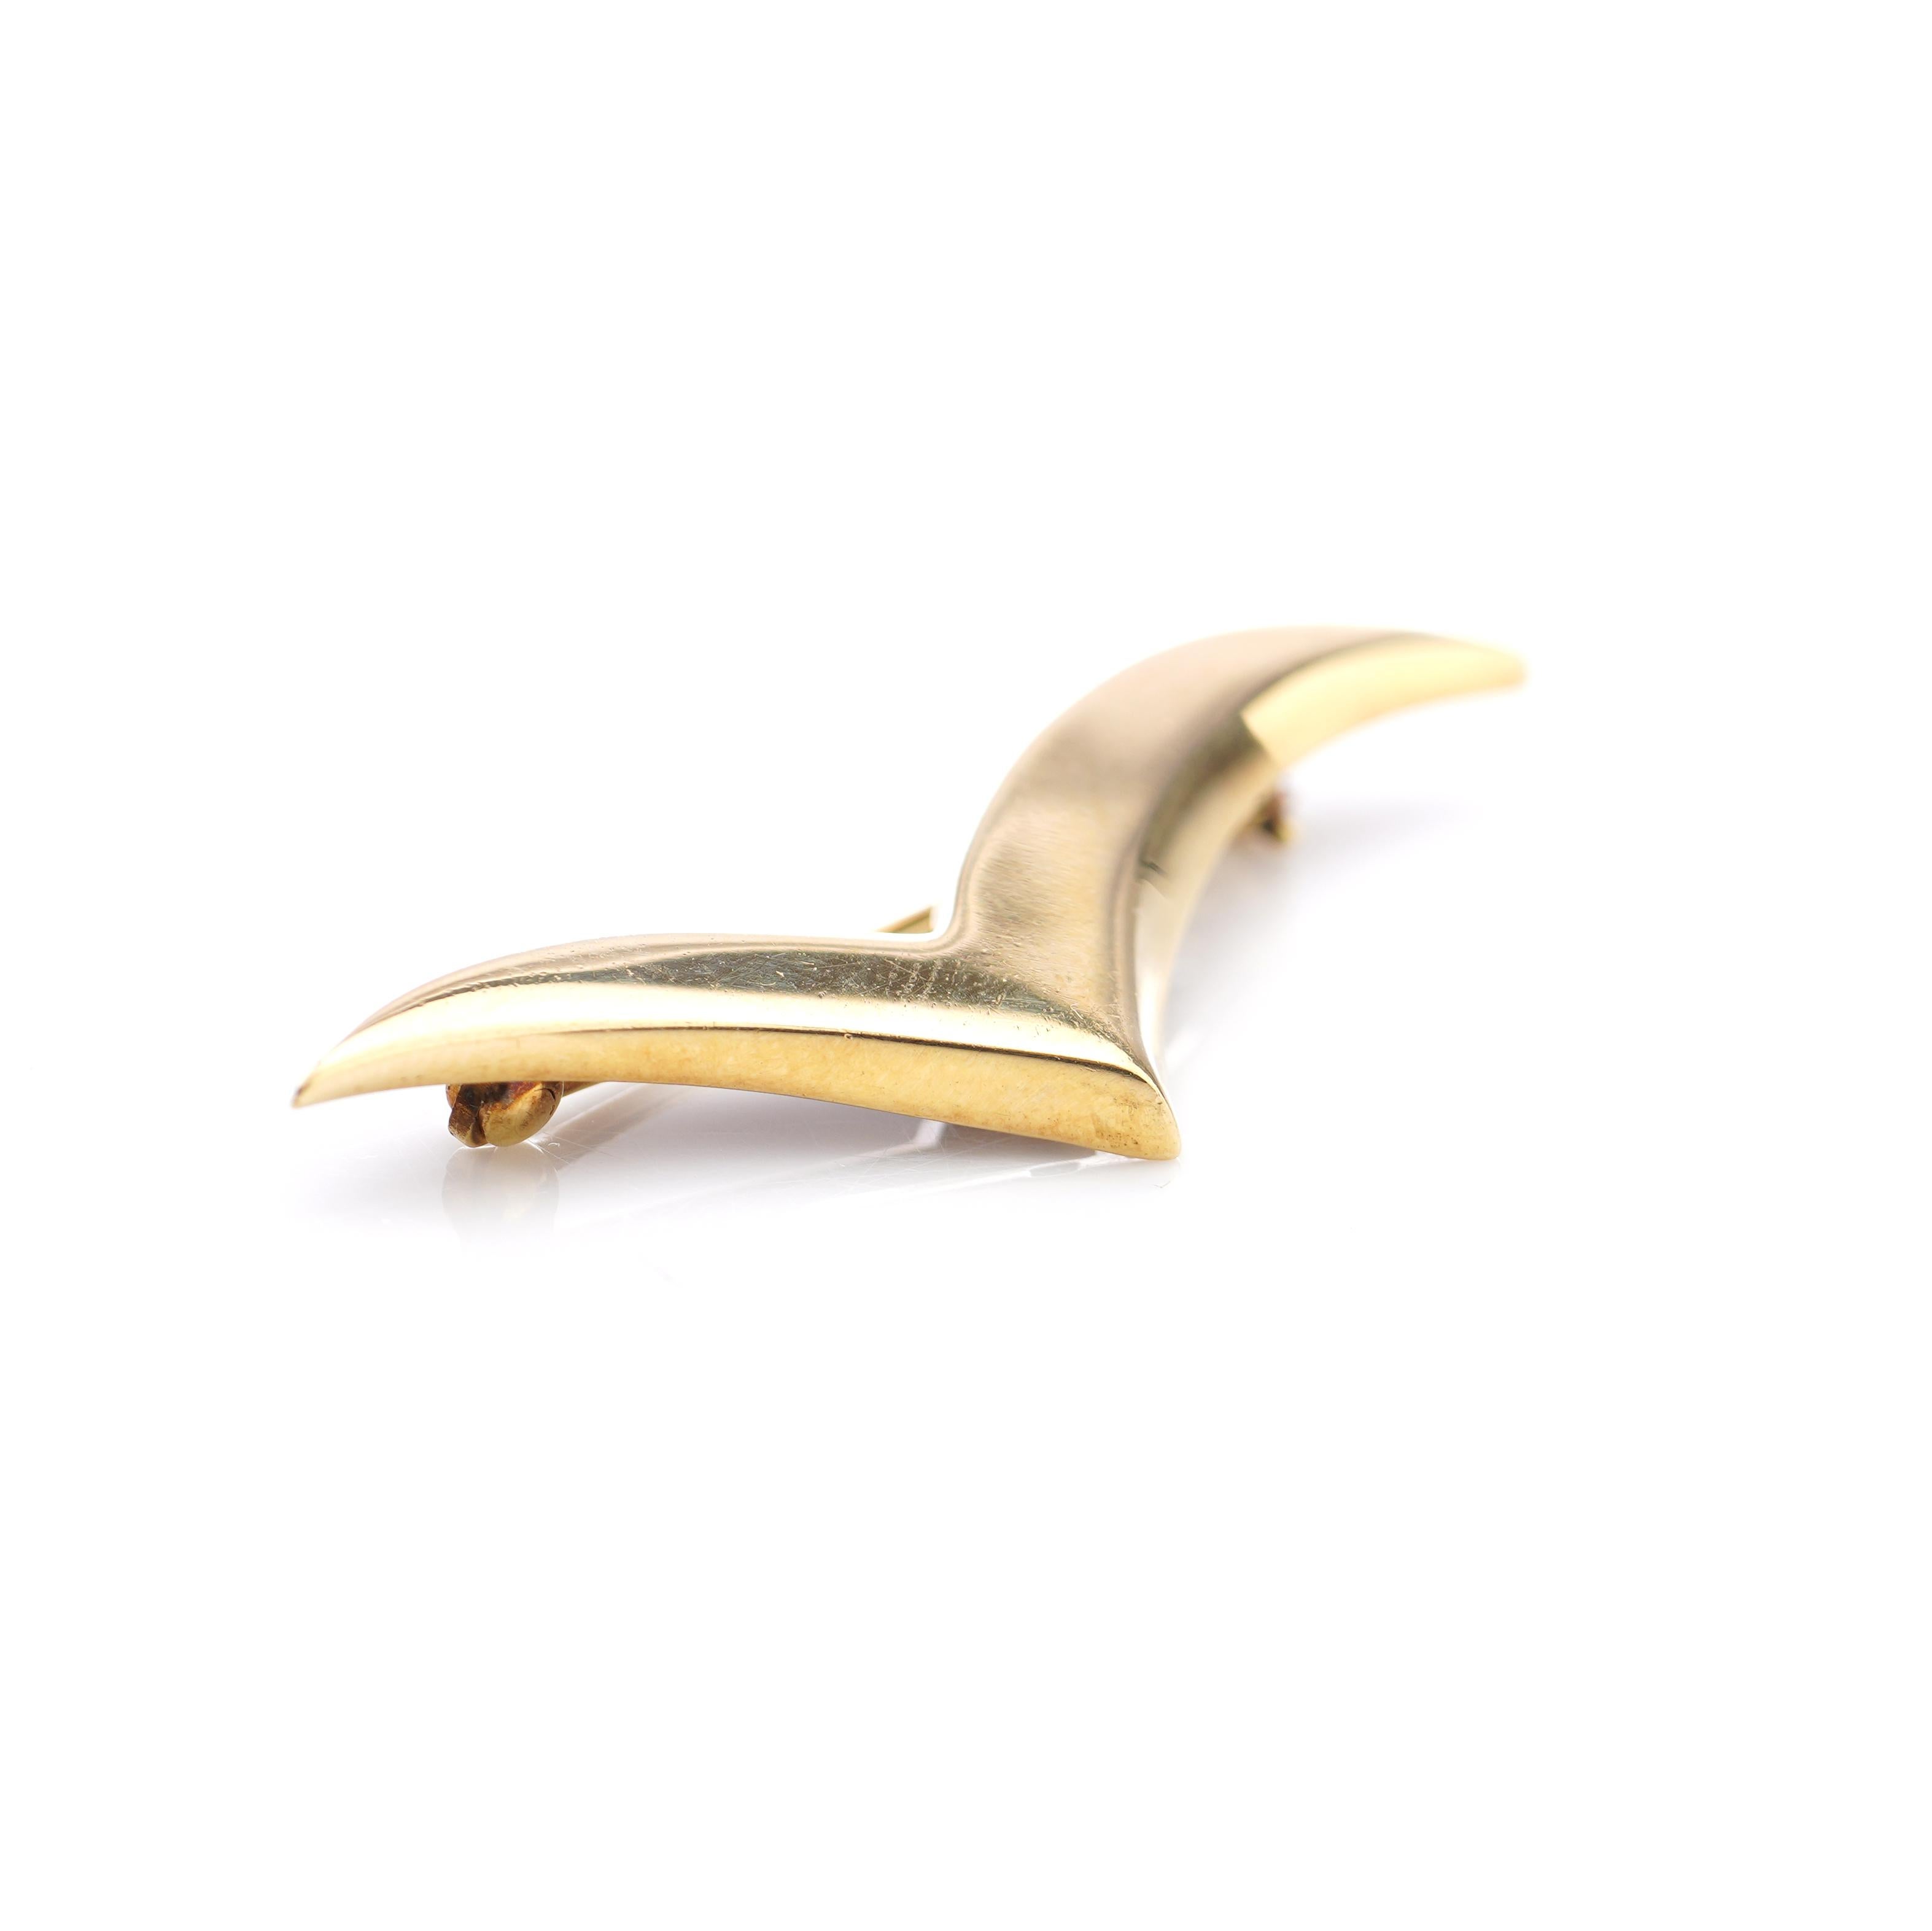 Tiffany & Co. 18kt. yellow gold seagull brooch pin. 
Made Ca.1990's 
Hallmarked with Tiffany & Co. and 18kt. gold. 

Dimensions -
Length x width x height: 4.5 x 1.5 x  0.5 cm 
Weight: 4.00 grams

Condition: Brooch is pre-owned, minor signs of usage,